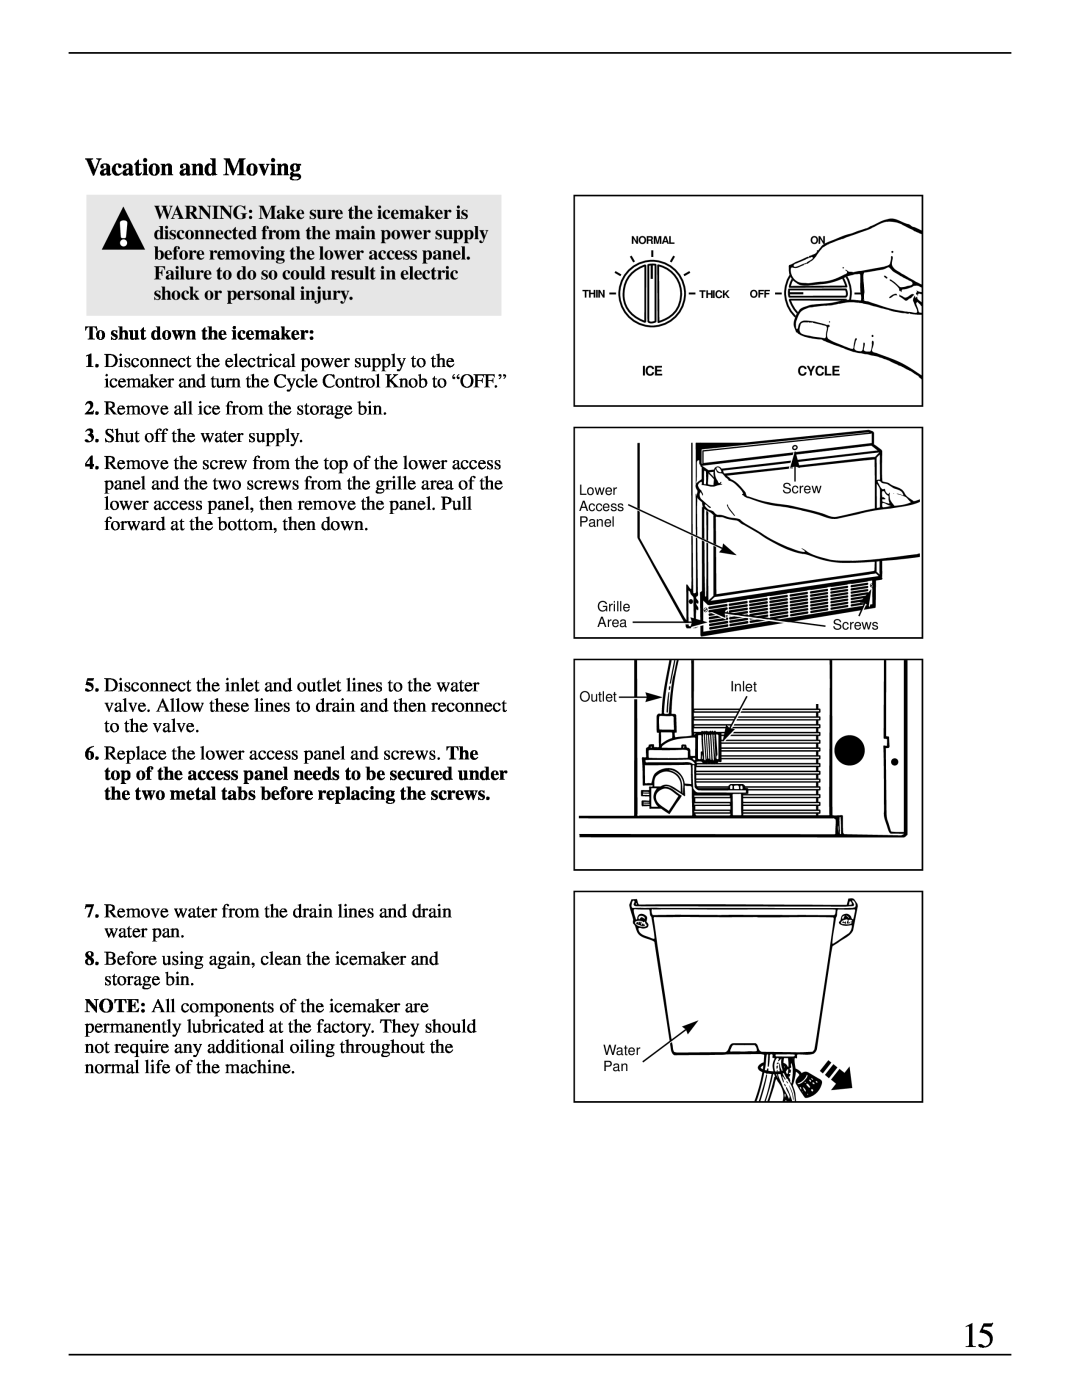 GE Monogram ZDIW50 installation instructions Vacation and Moving, To shut down the icemaker 